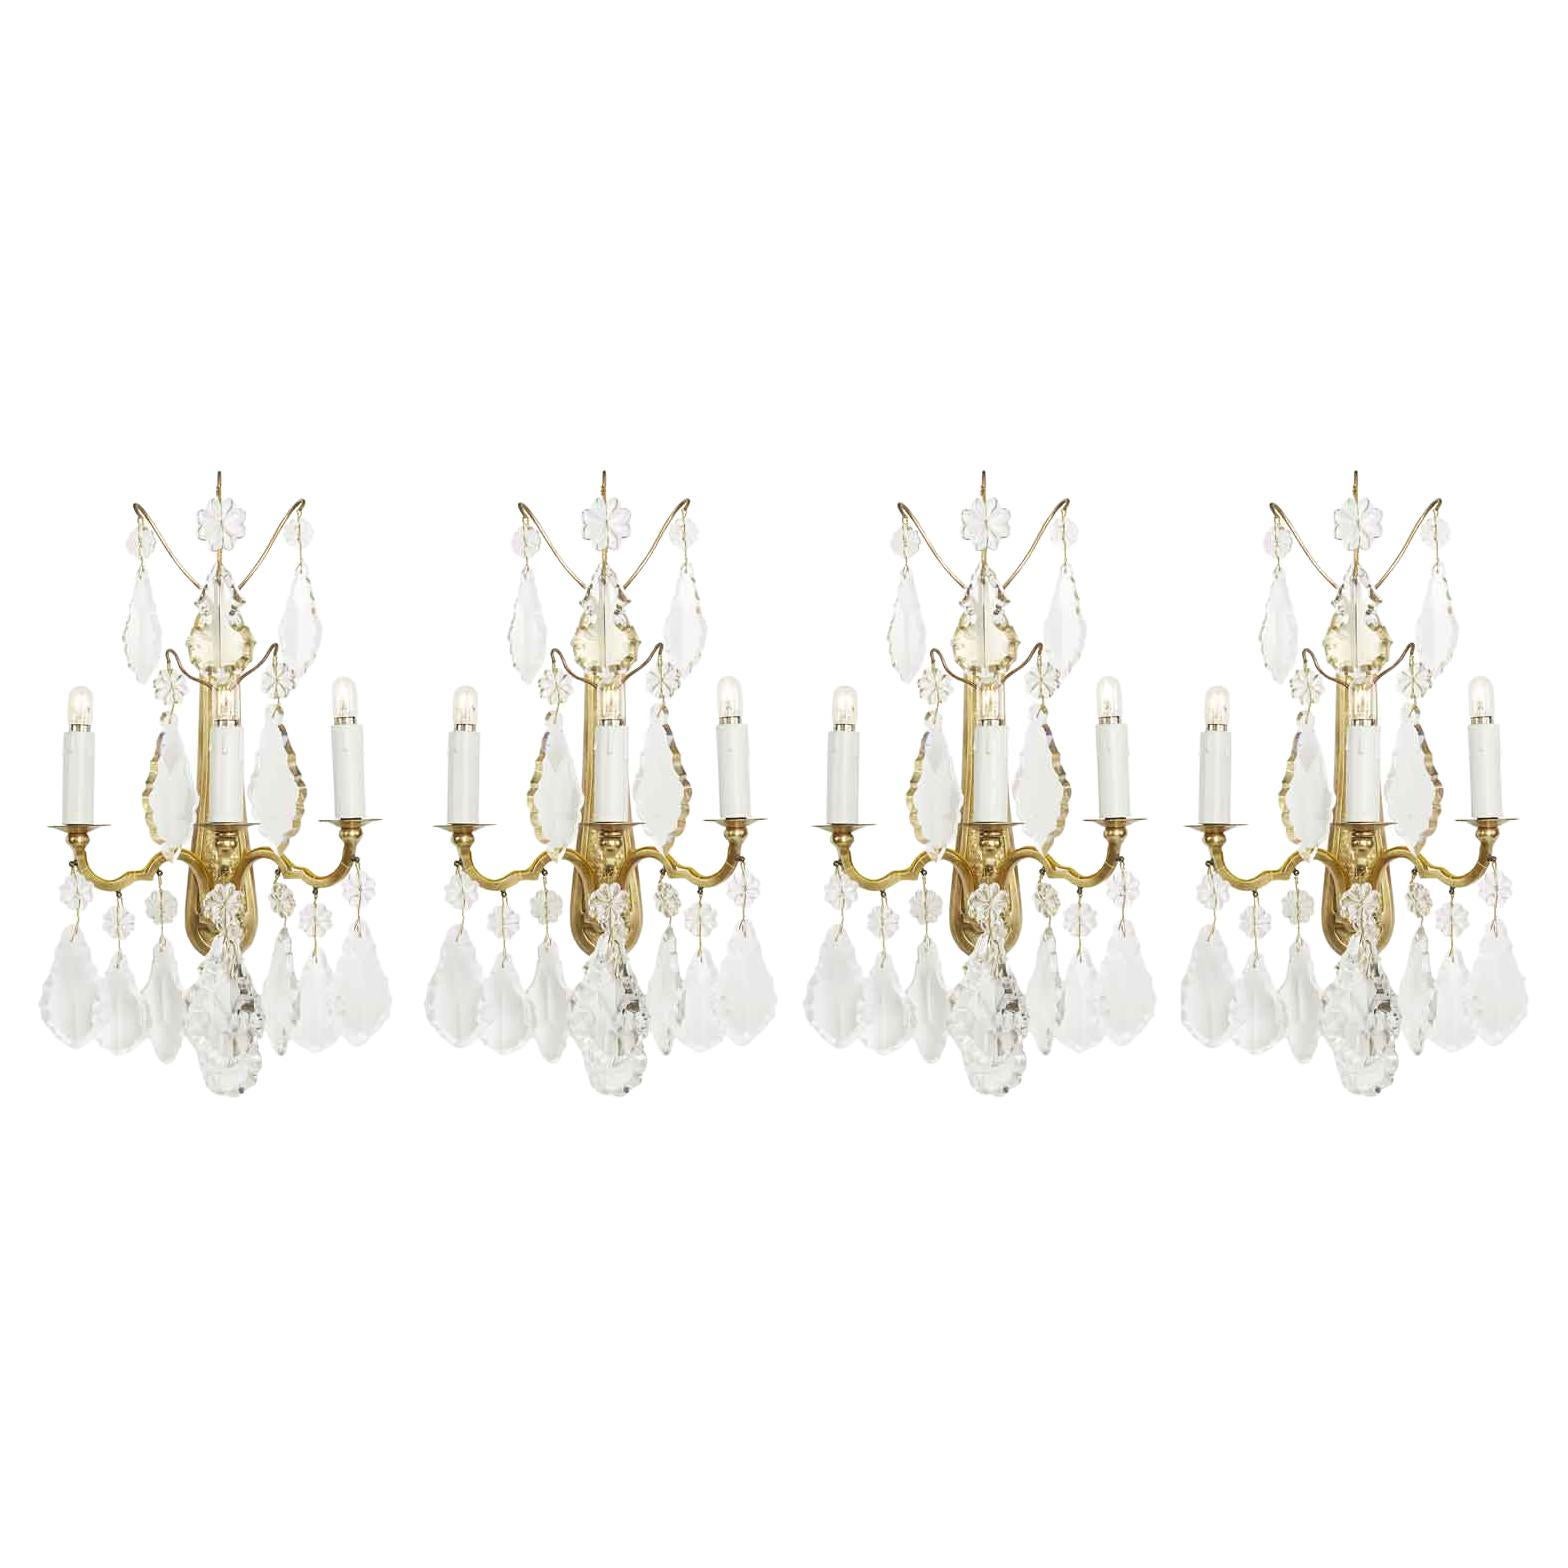 Set of Four Baccarat Crystal Sconces 20th Century French Gilt Wall Lights